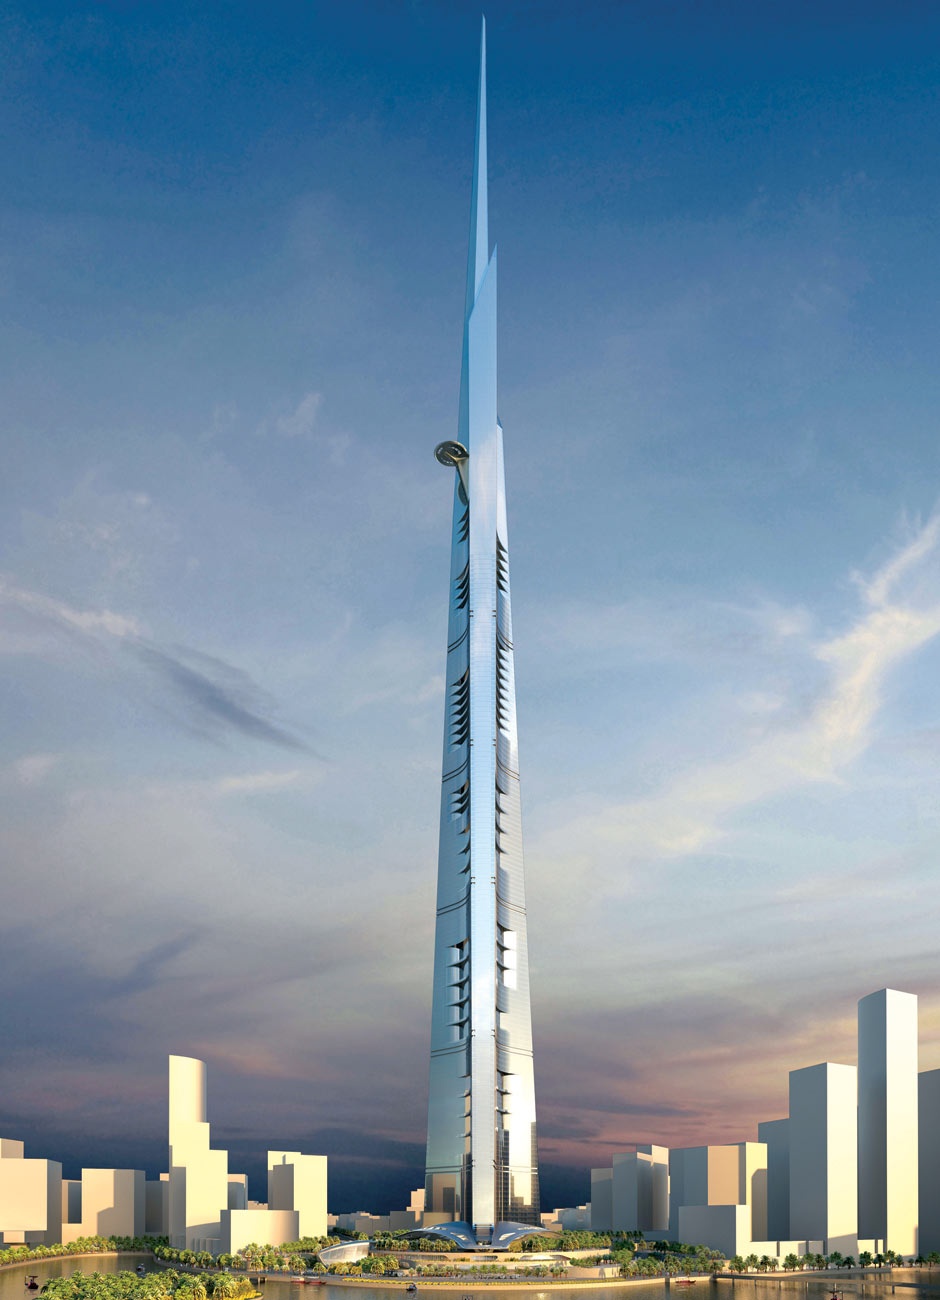 Artist impression of the Kingdom Tower in Jeddah, which aims to be the world"s tallest building